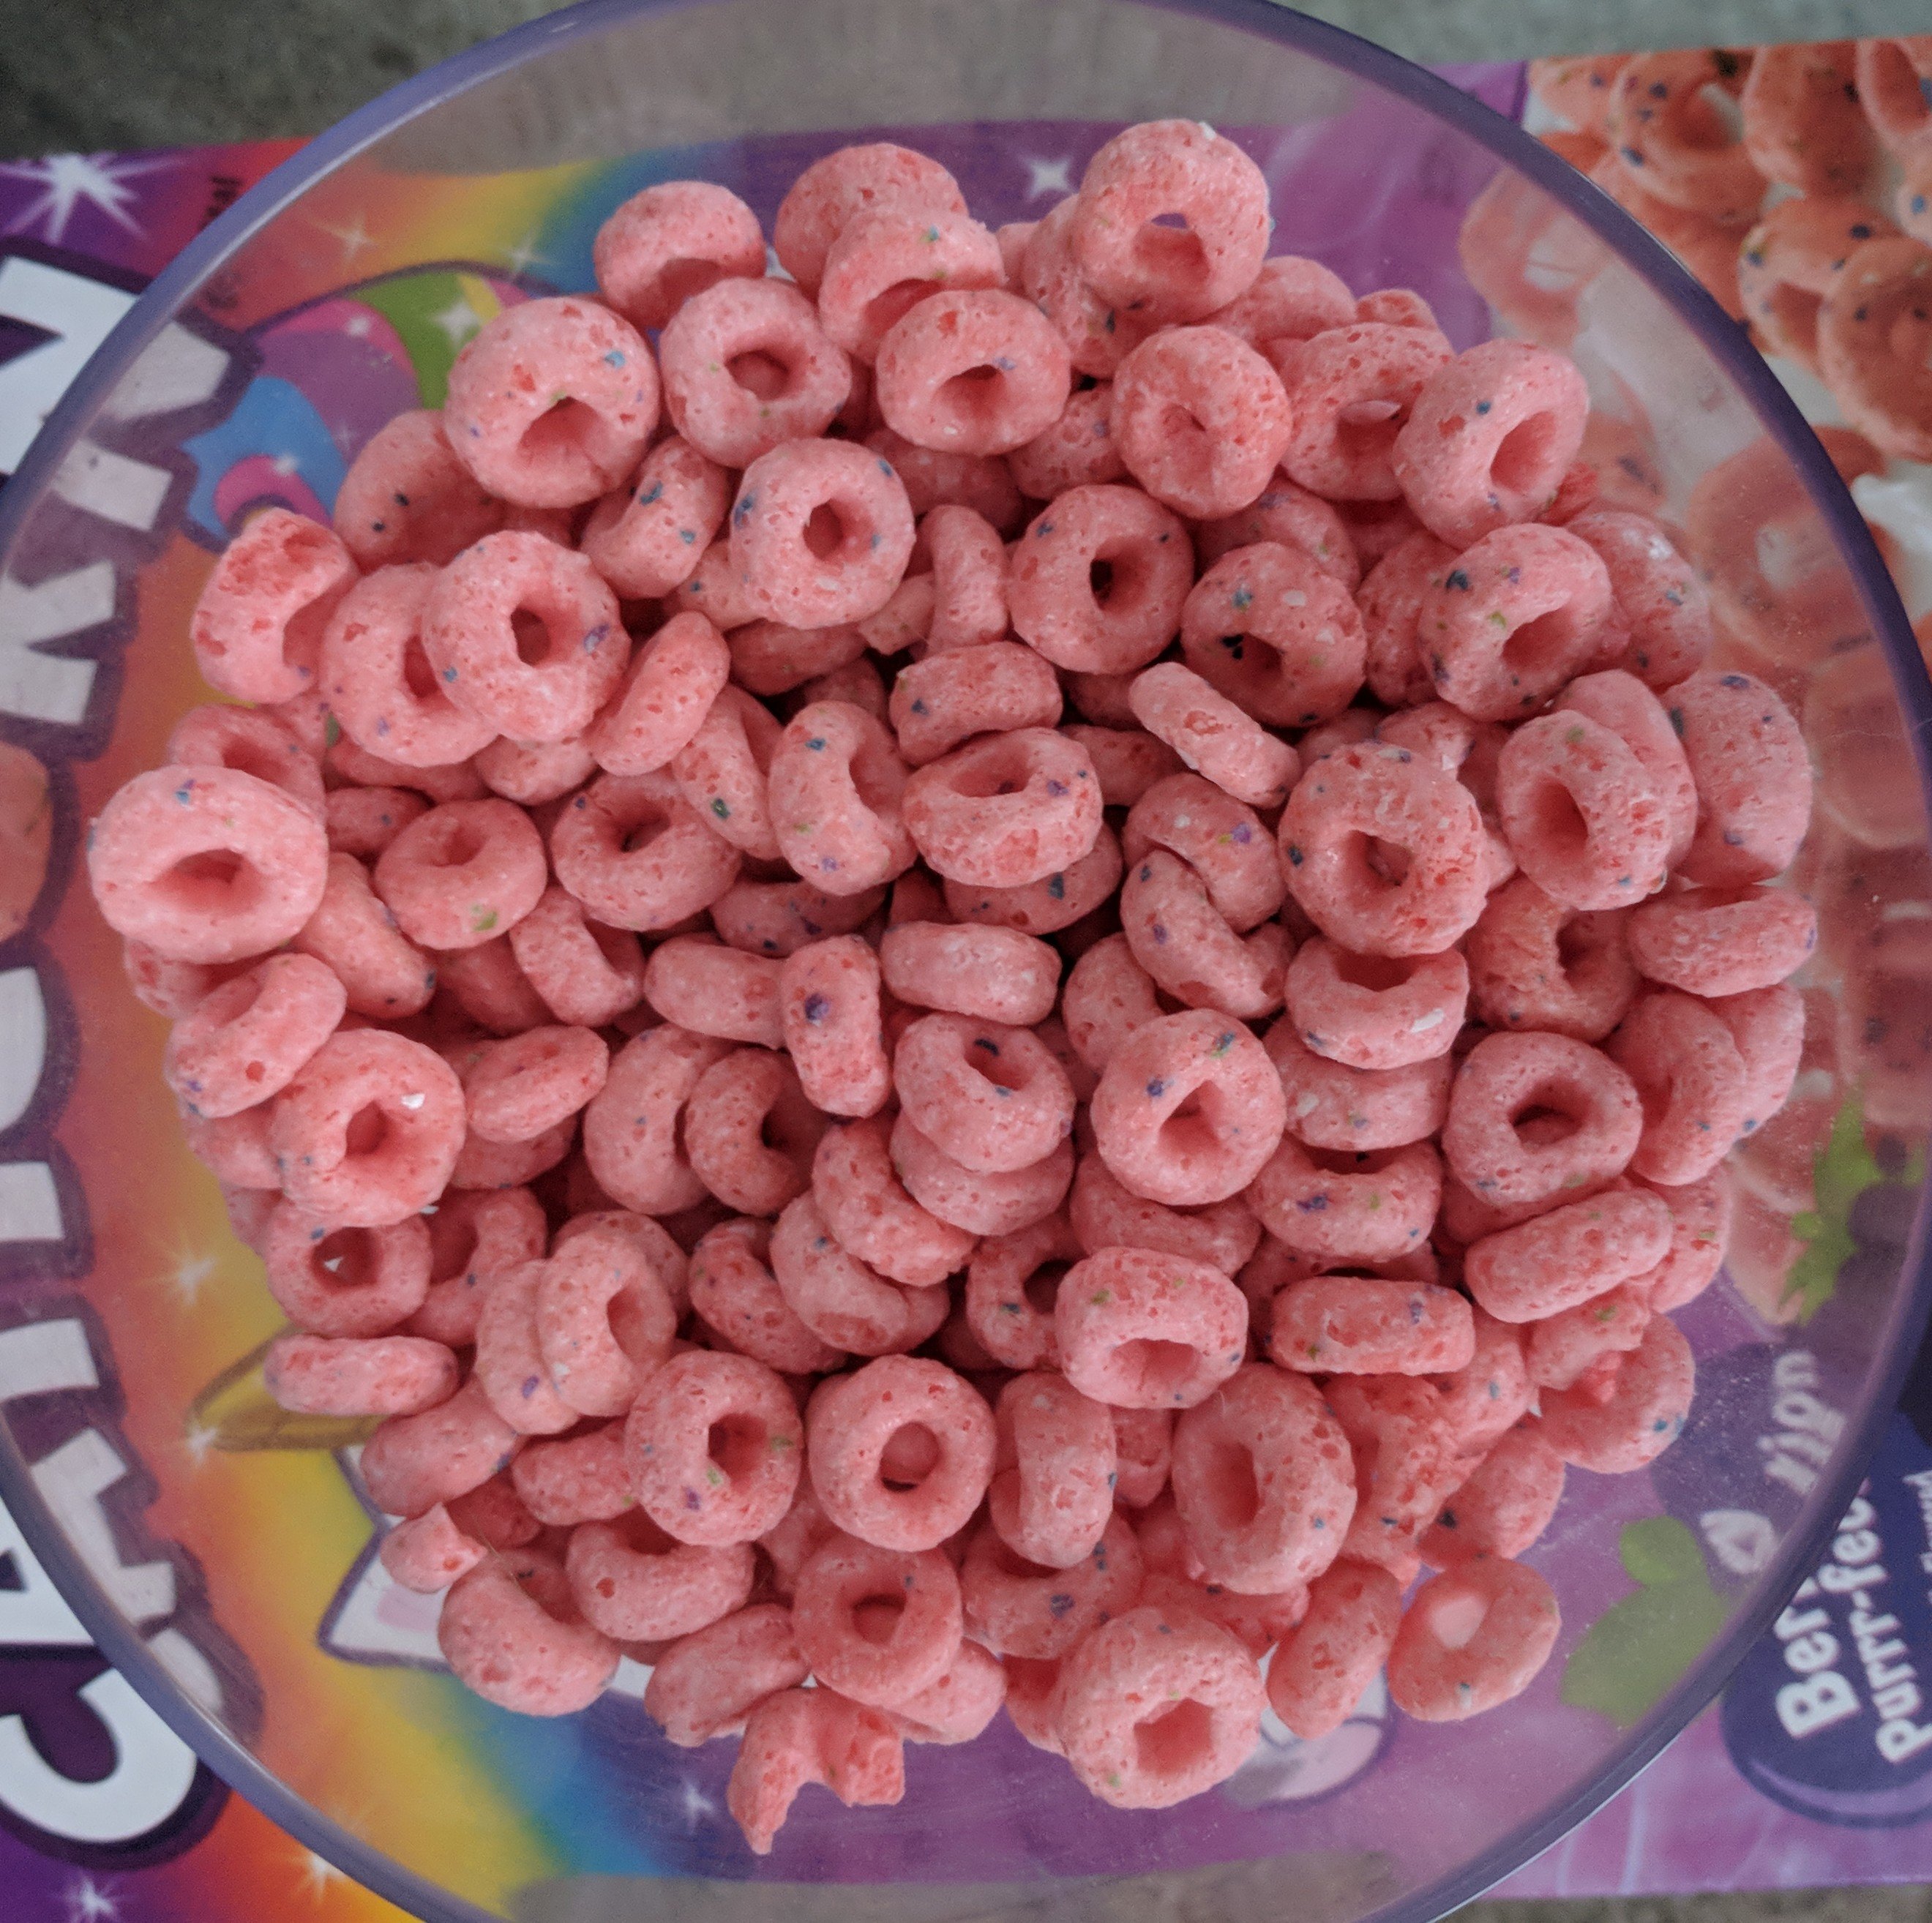 Caticorn Cereal Review